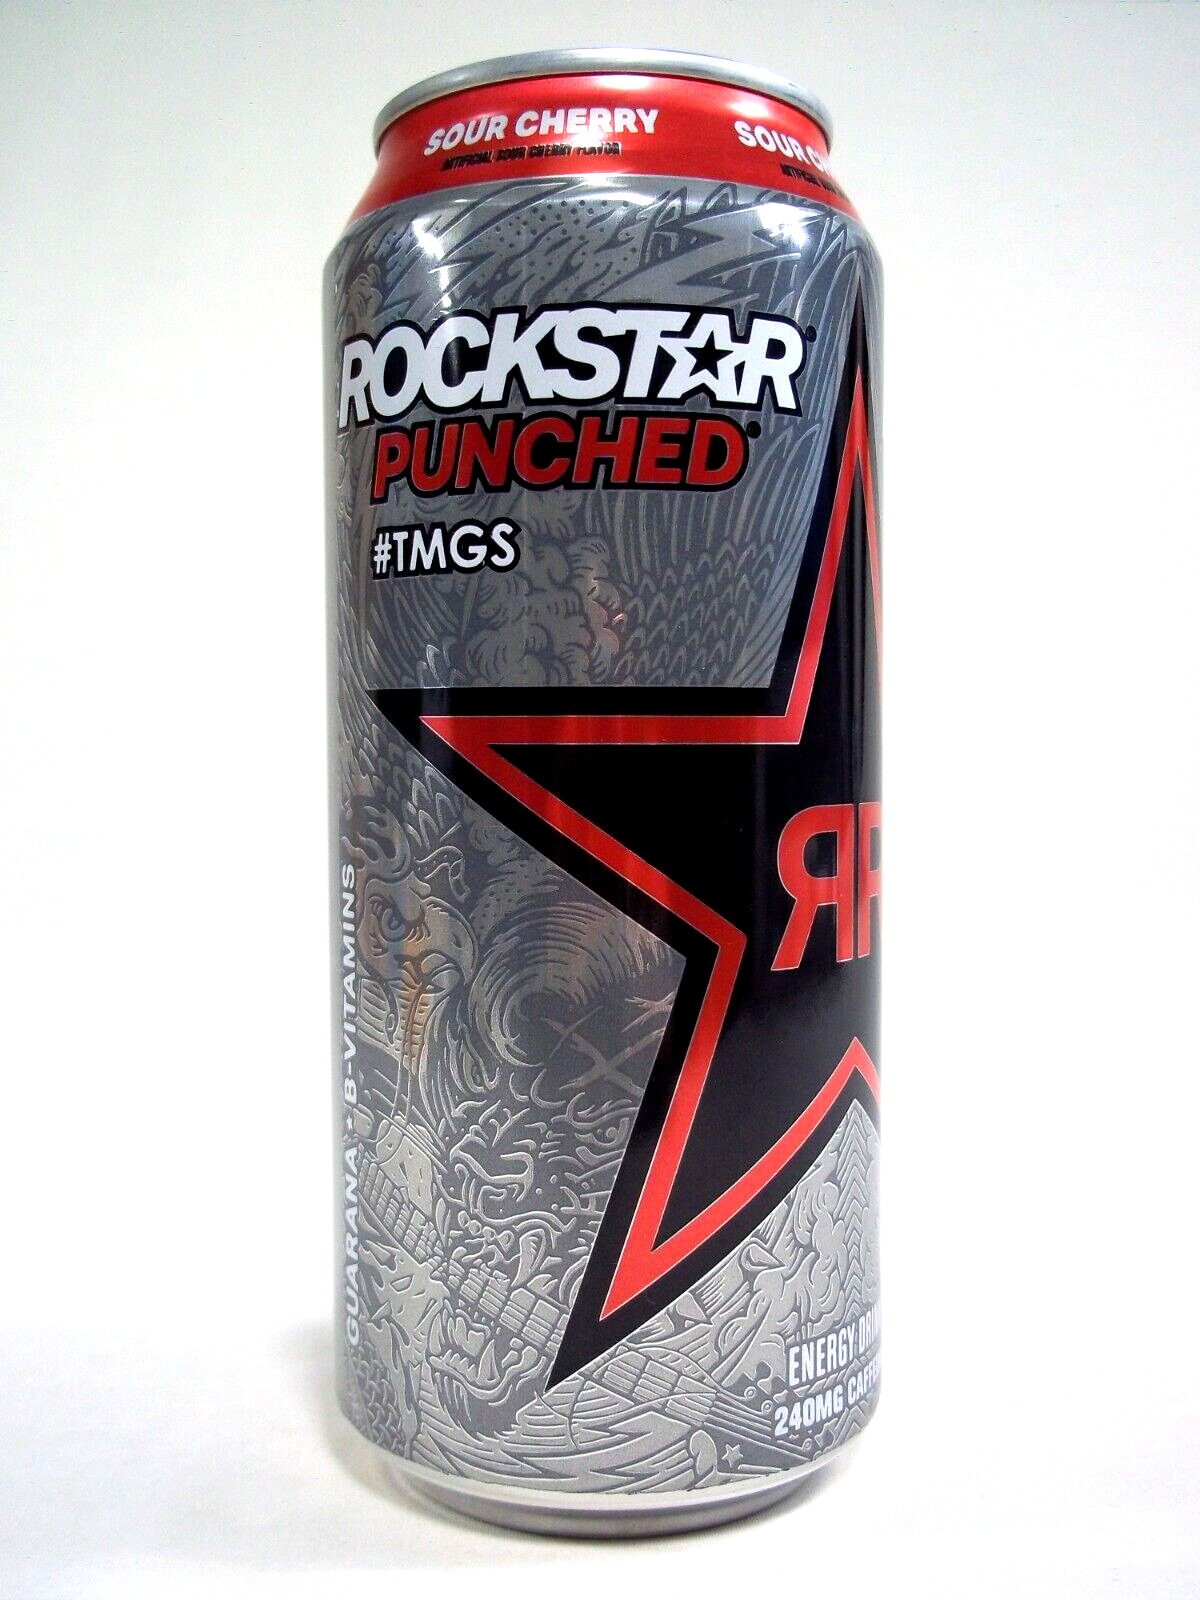 Rare Limited Rockstar Punched Sour Cherry Flavor Energy Drink 16 oz Can Caffeine